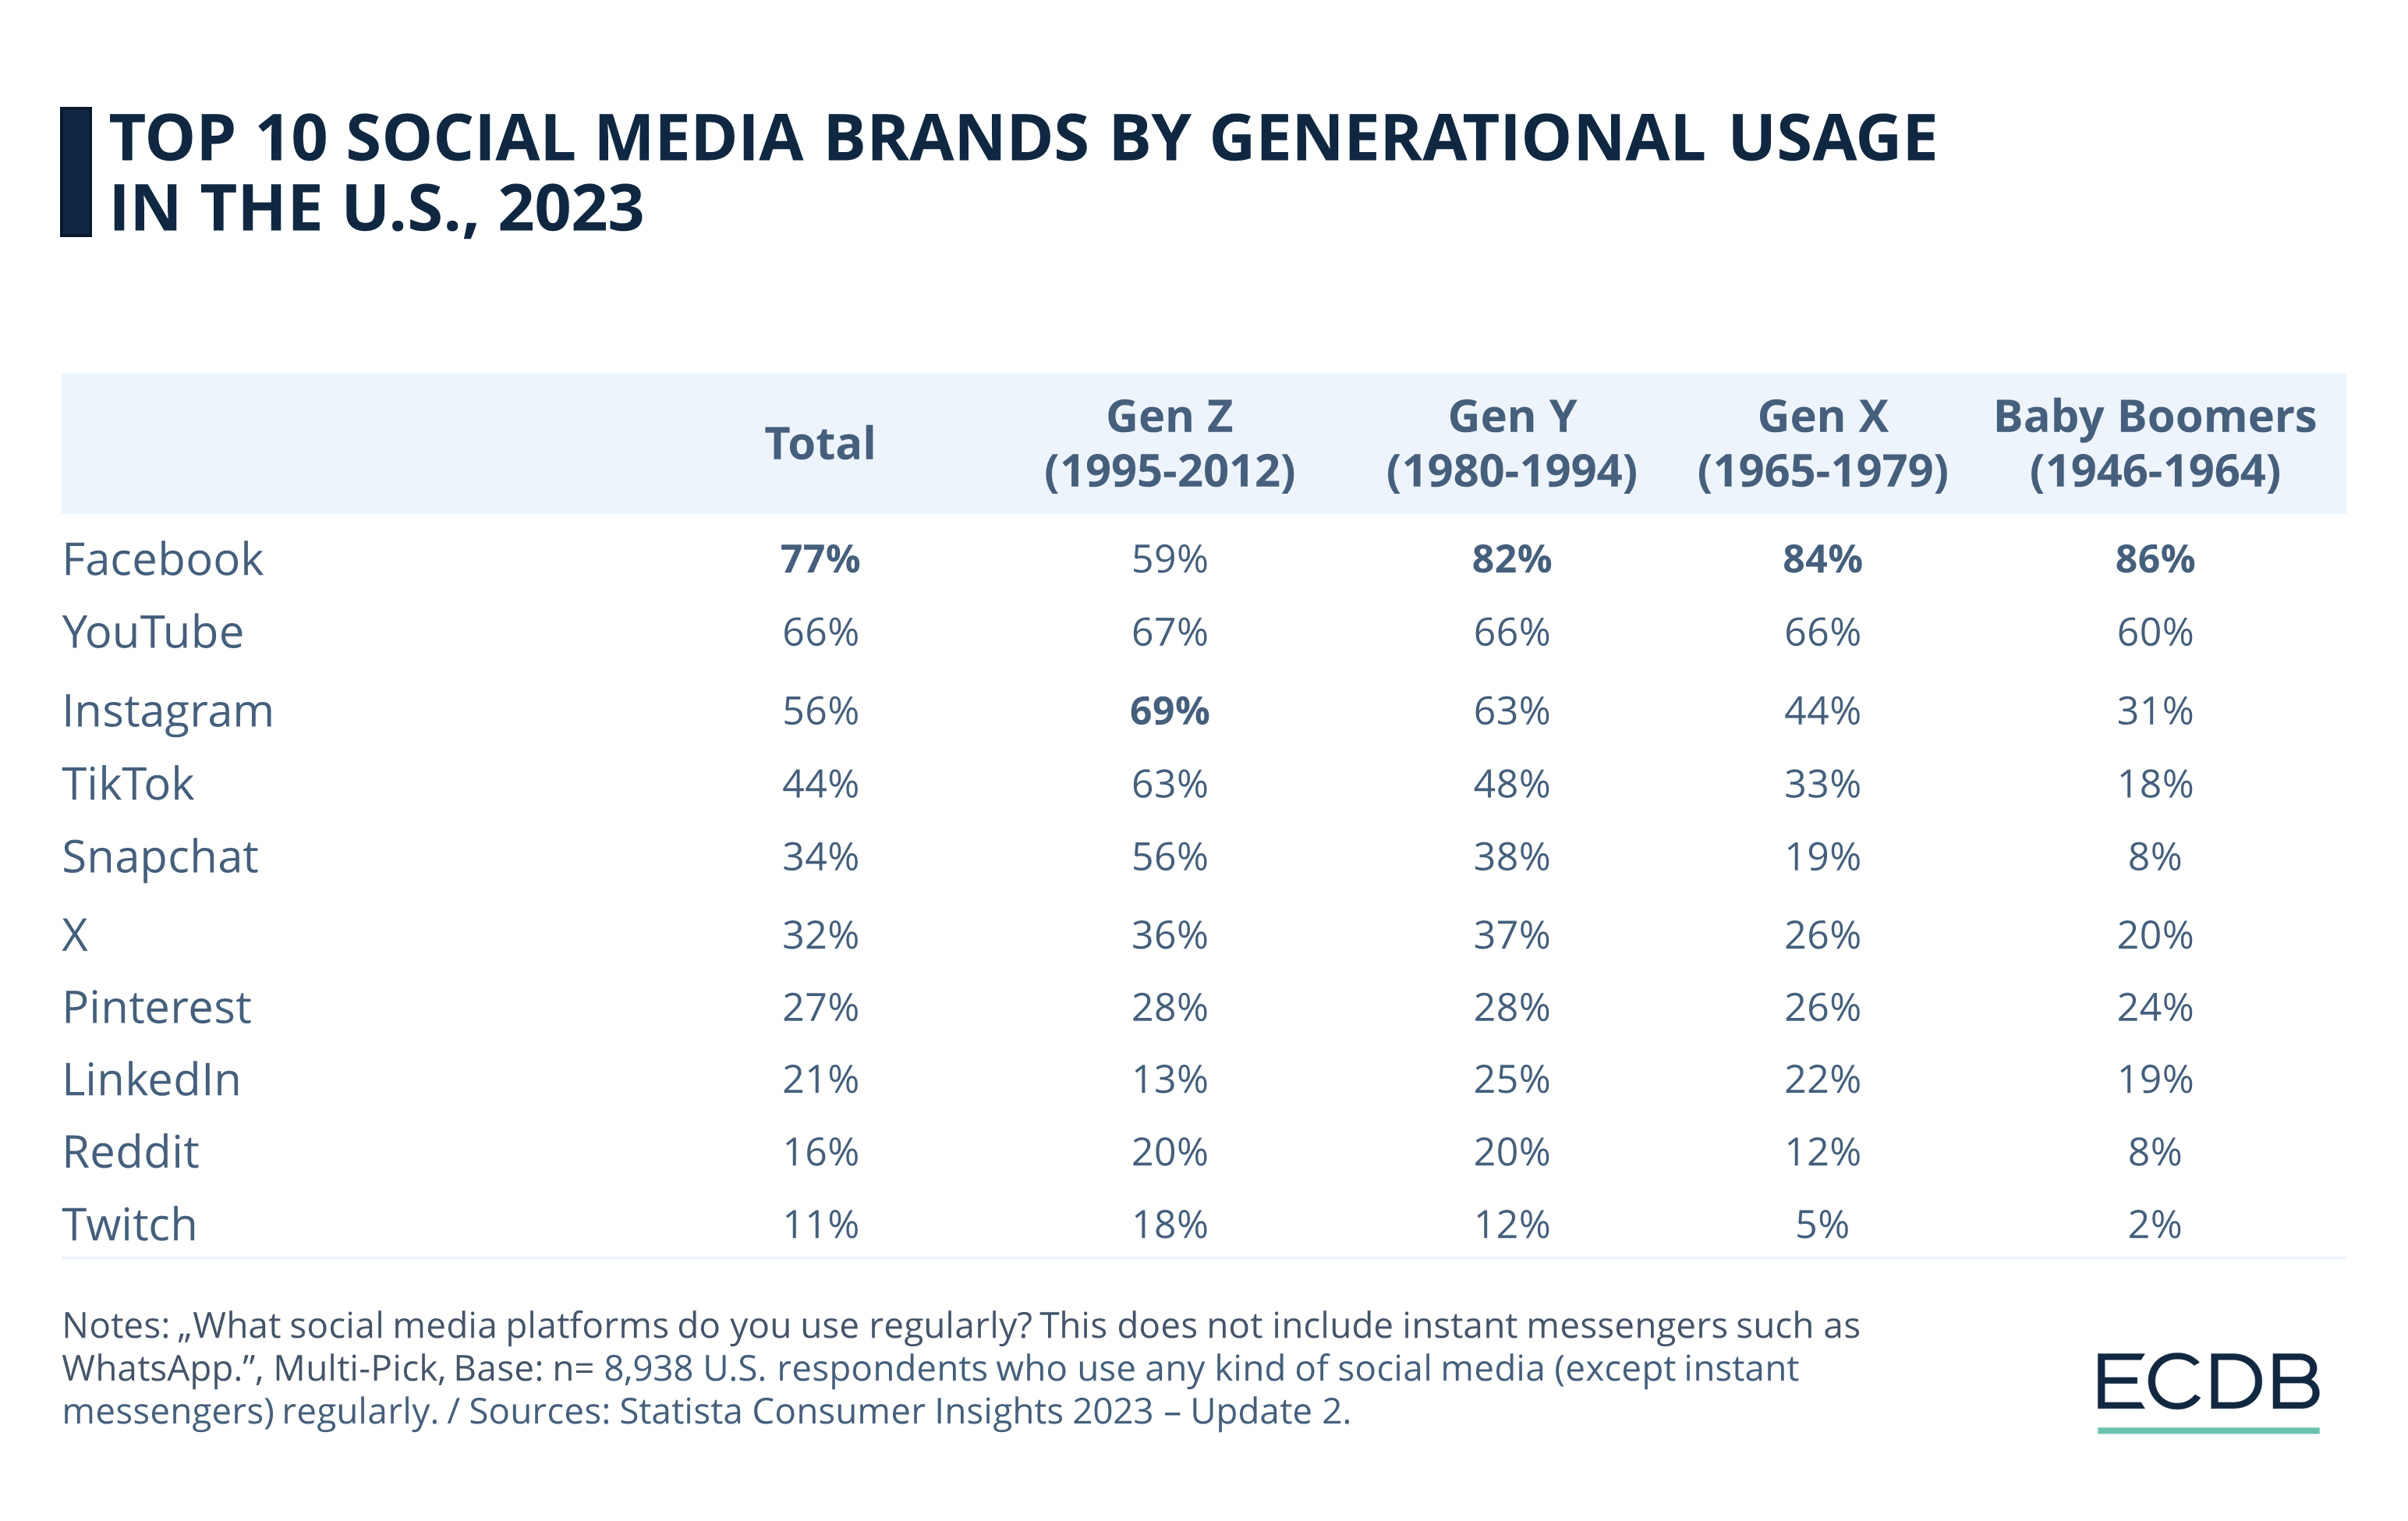 Top 10 Social Media Brands by Generational Usage in the U.S., 2023